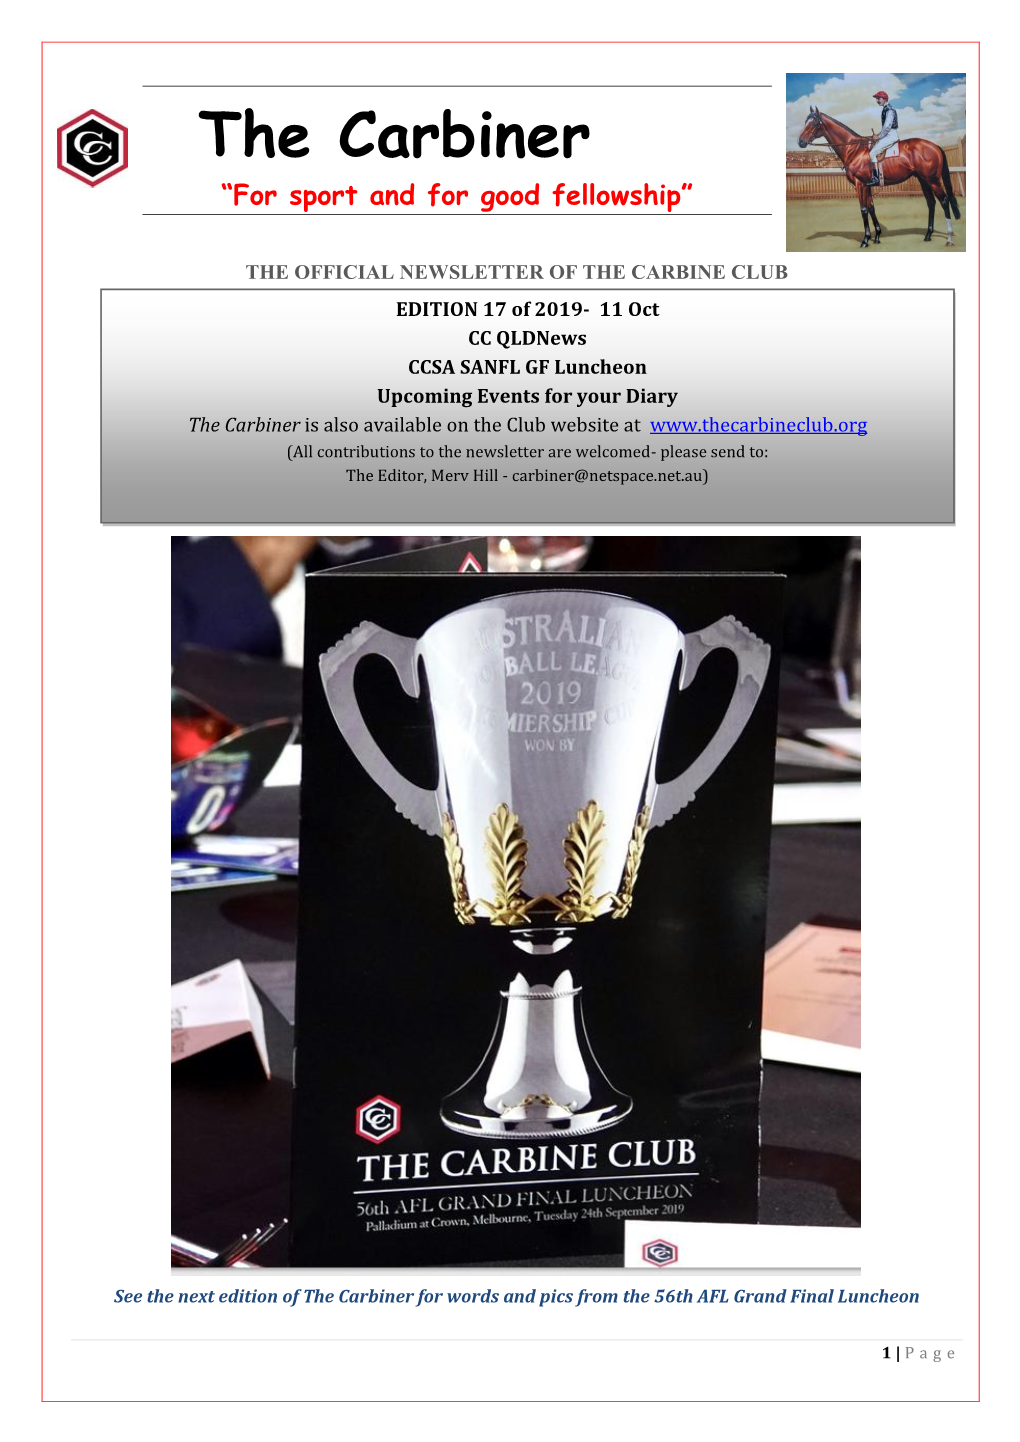 The Carbiner “For Sport and for Good Fellowship”